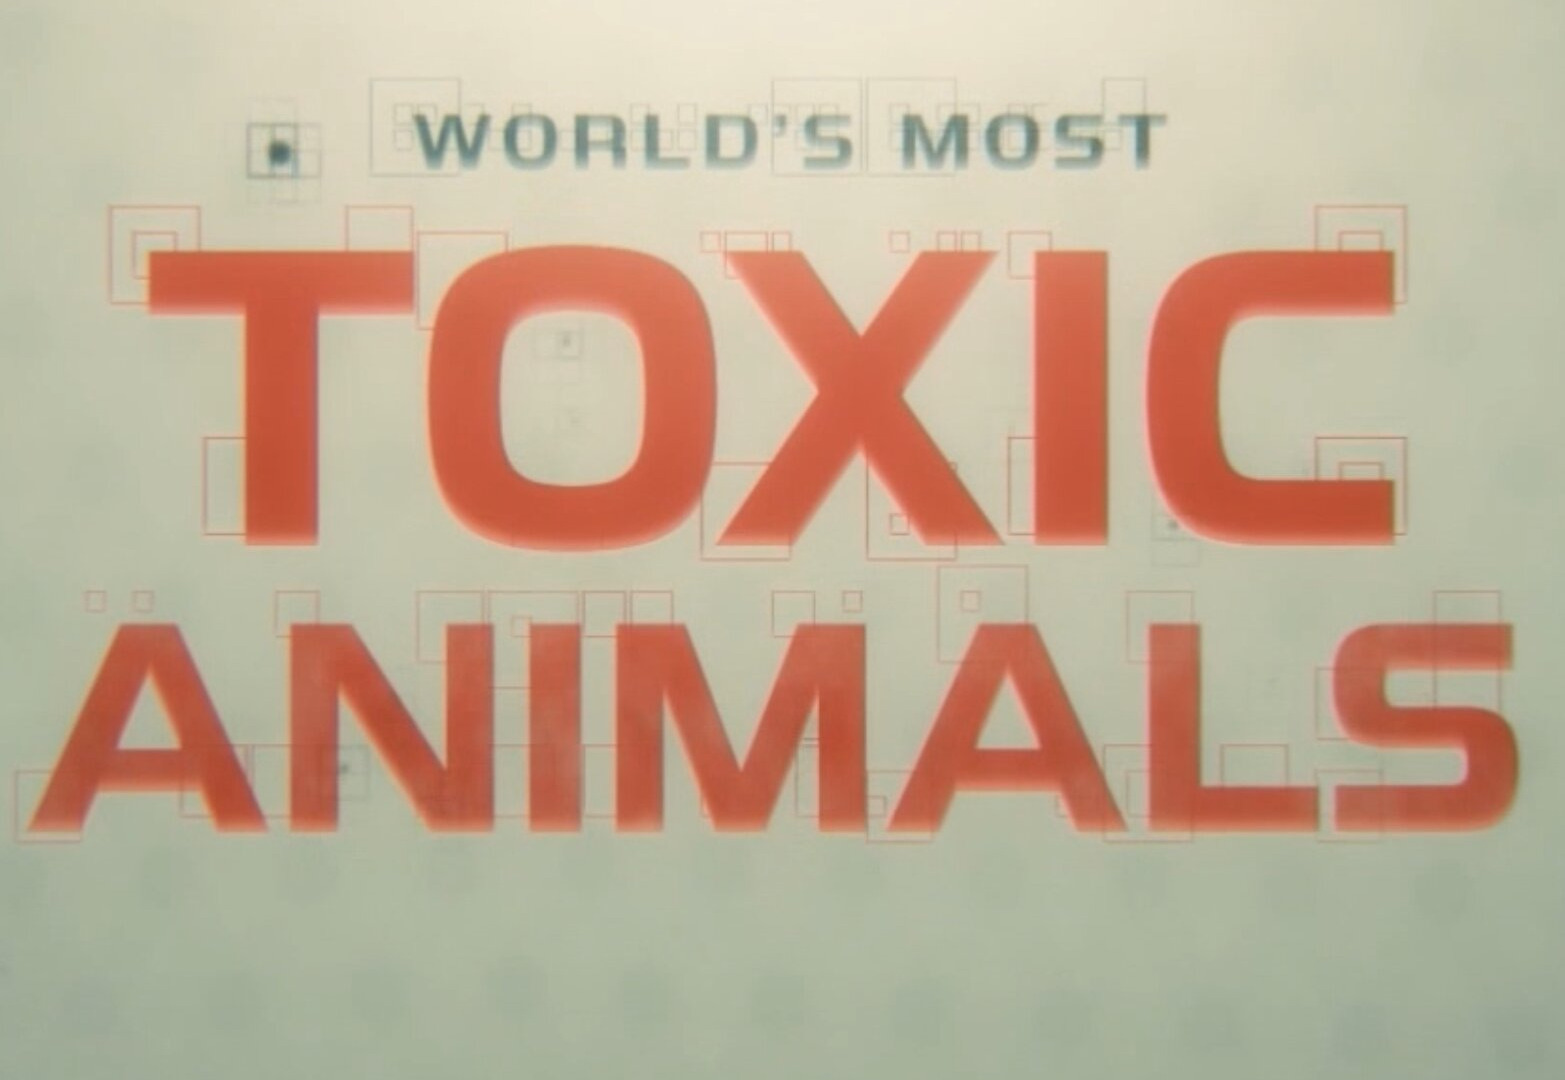 Show World's Most Toxic Animals